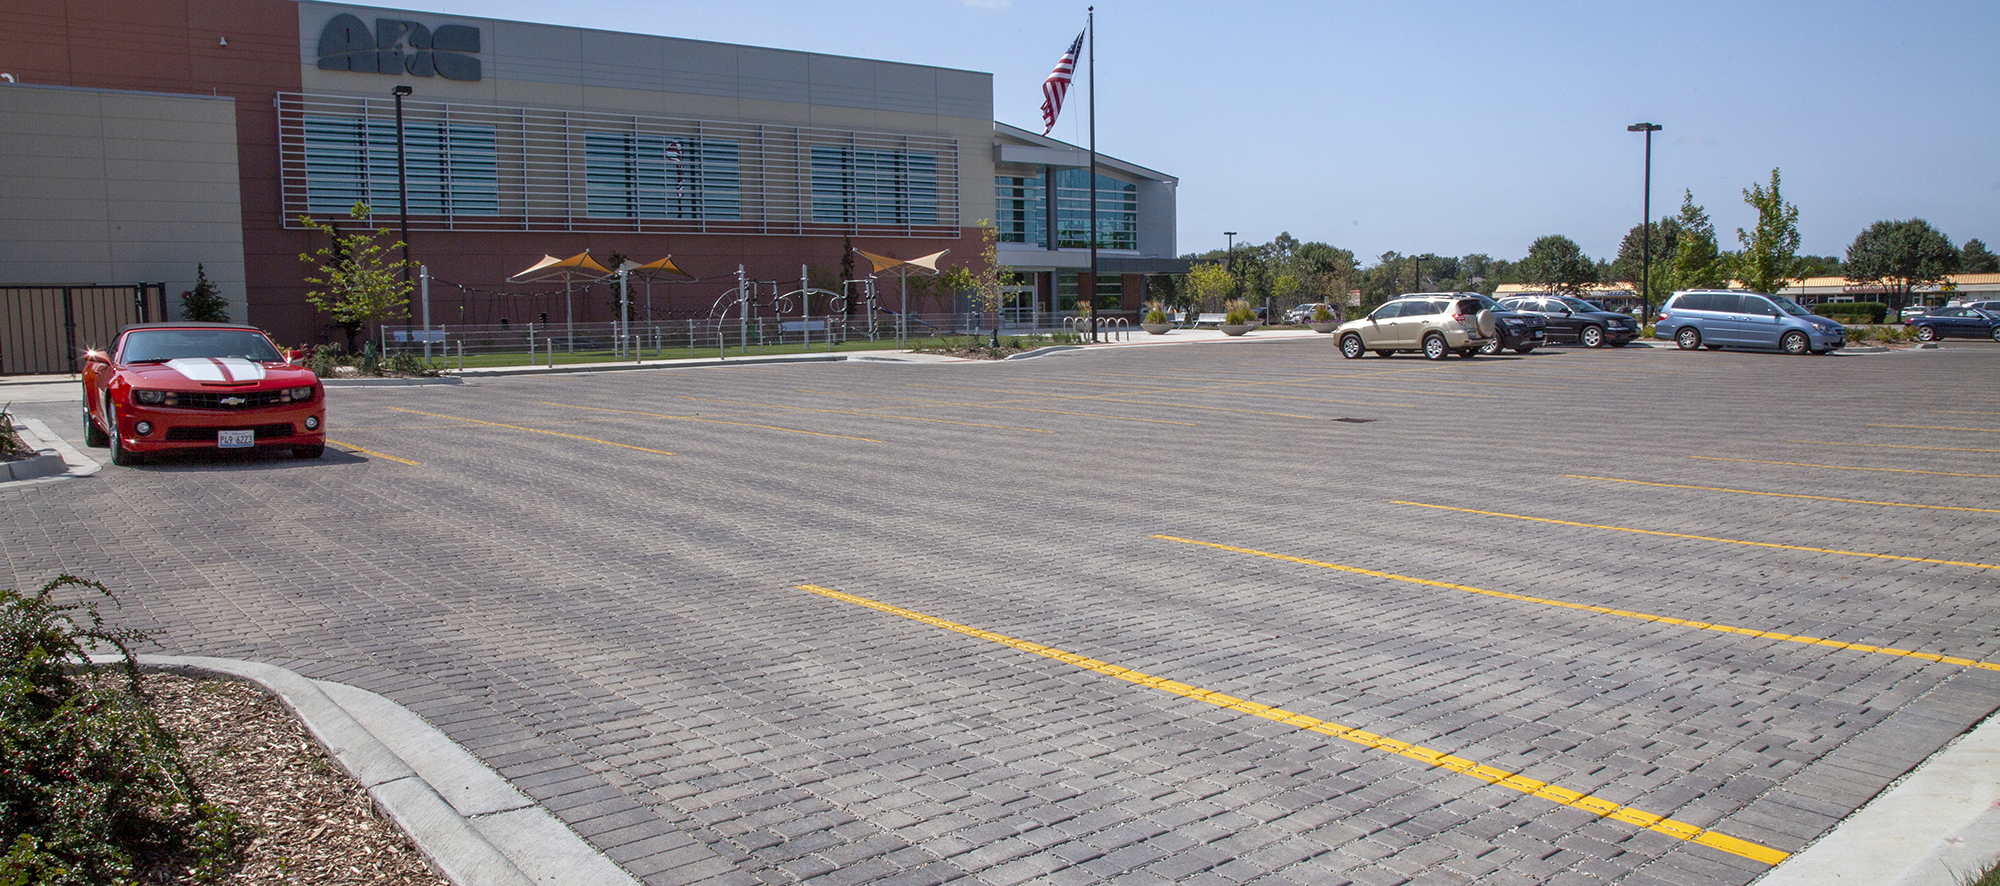 The parking lot of an Athletic and Recreation Center with Eco-Optiloc permeable pavers in Natural with yellow lines marking where to park.